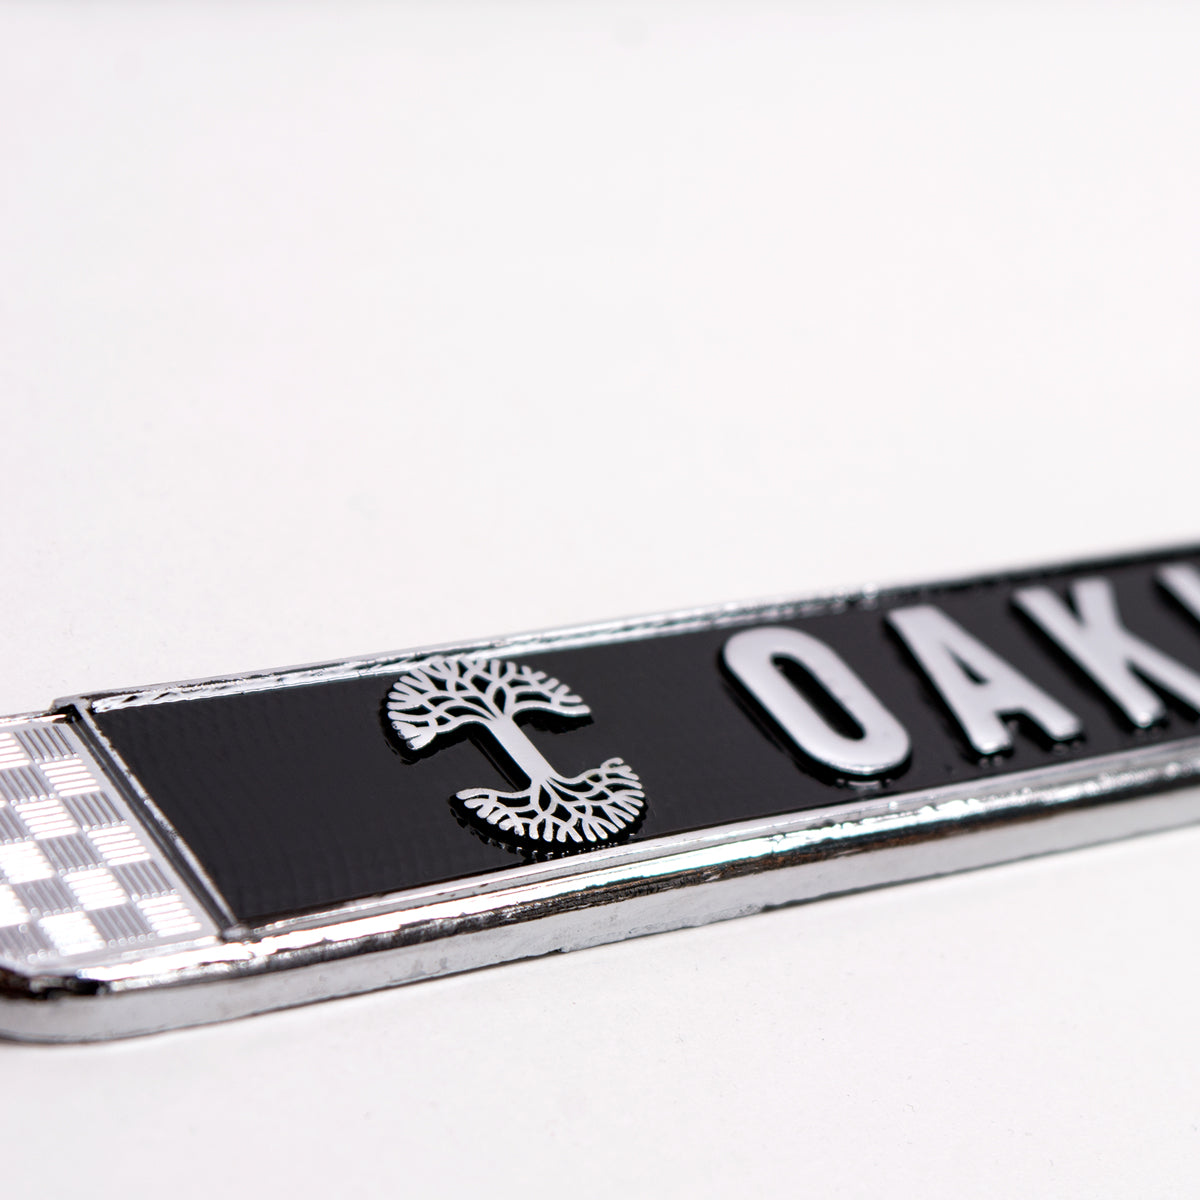 Detailed close-up of silver Oaklandish tree logo on the bottom black rim of a license plate holder.